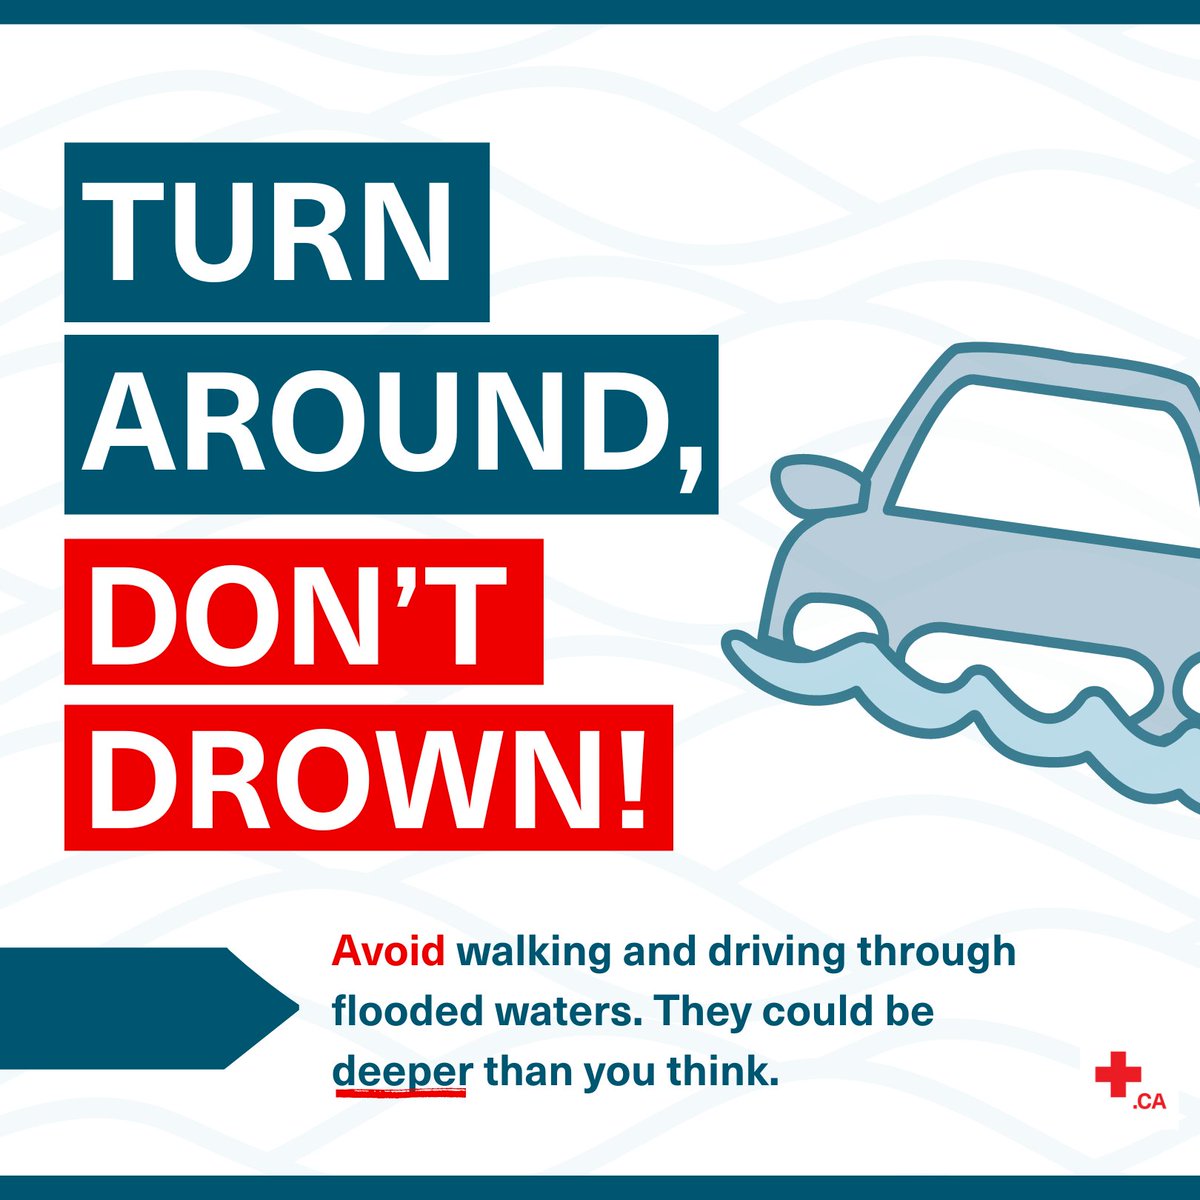 👎 Bad idea: driving through flooded waters. They could be deeper than you think. 👍Good idea: turning around and finding an alternative route. Learn more flood safety tips at brnw.ch/21wJjQ4